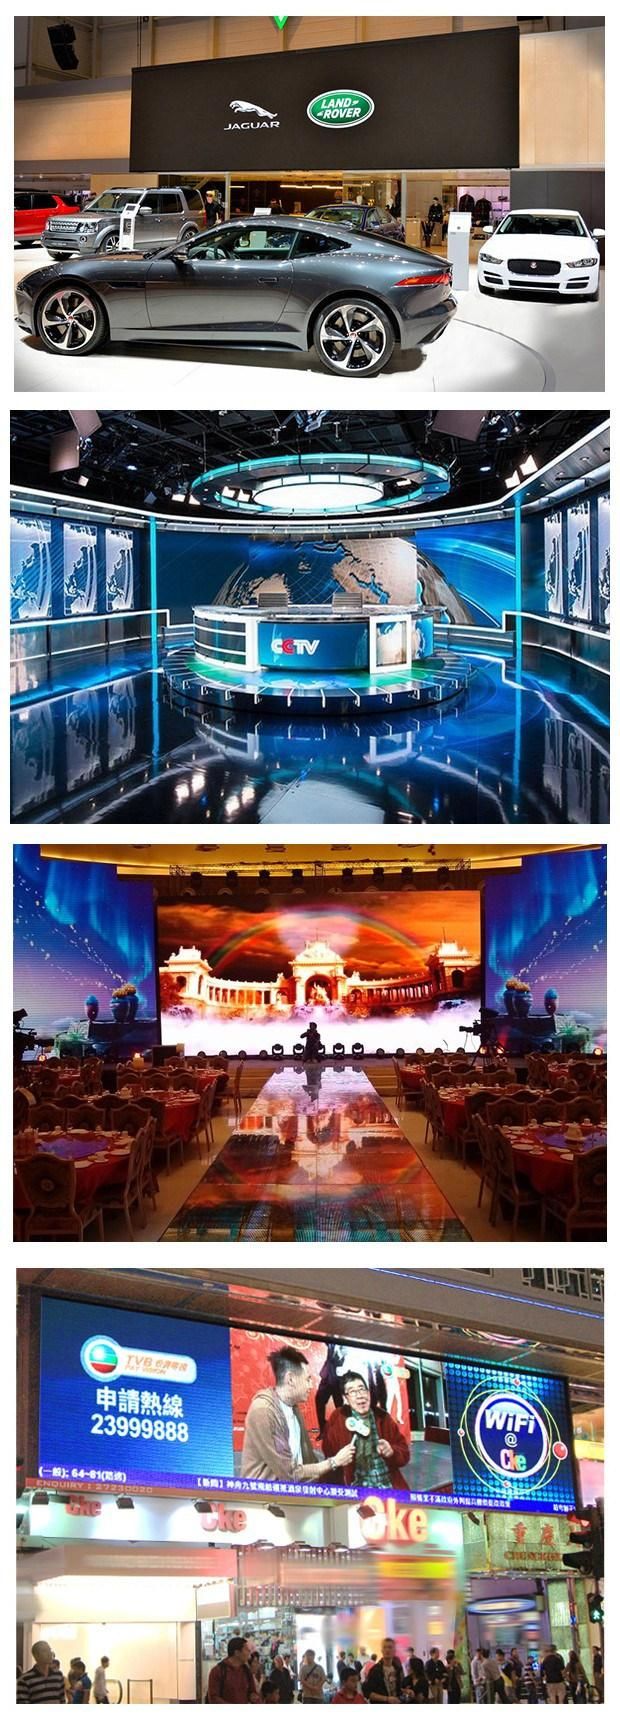 Video Stage Performance/ Advertising/ Shopping Guide Fws Outdoor LED Display